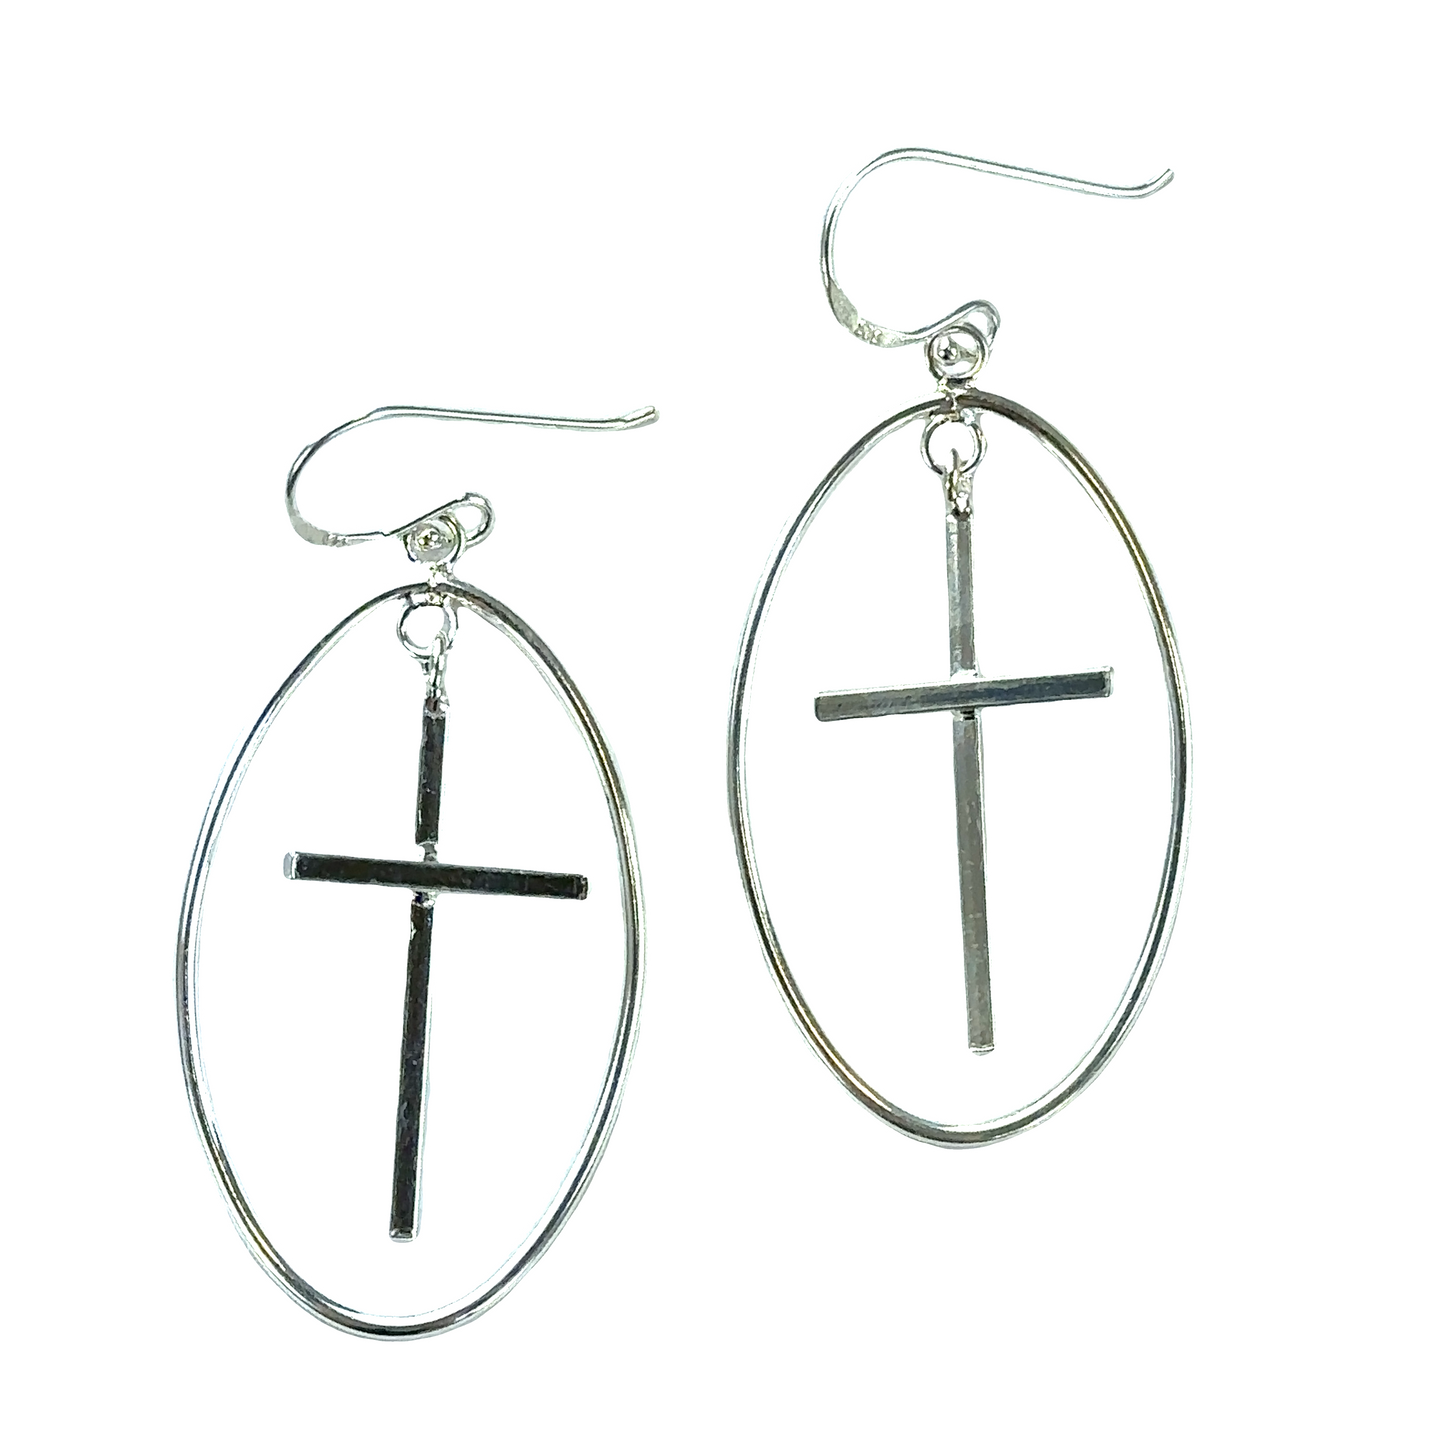 Super Silver's Modern Cross Earrings with a .925 Silver finish, showcased on a white background.